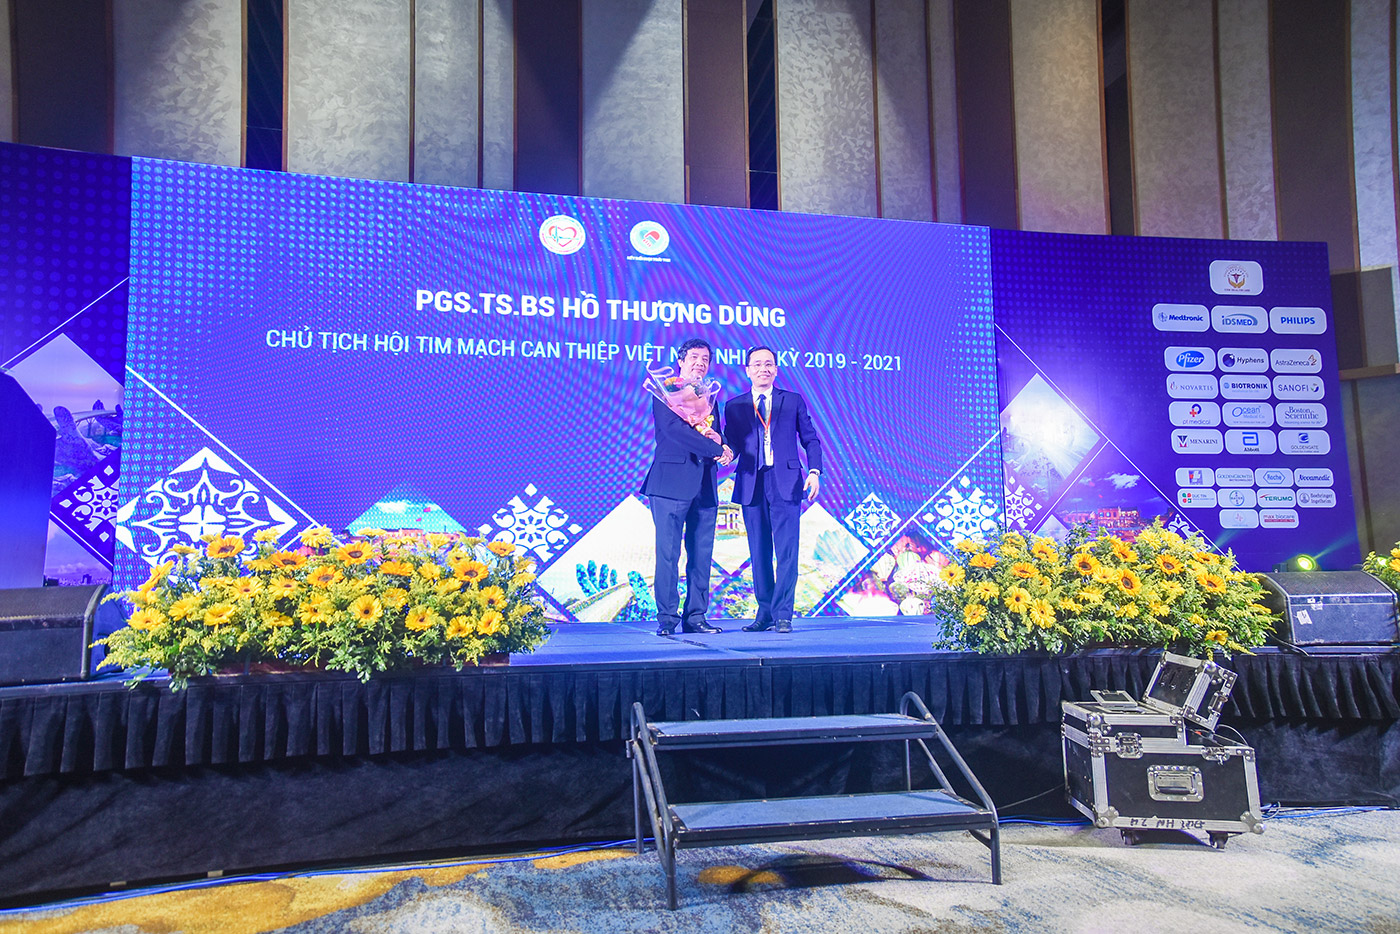 THE 6TH VIETNAM NATIONAL CONGRESS OF INTERVENTIONAL CARDIOLOGY